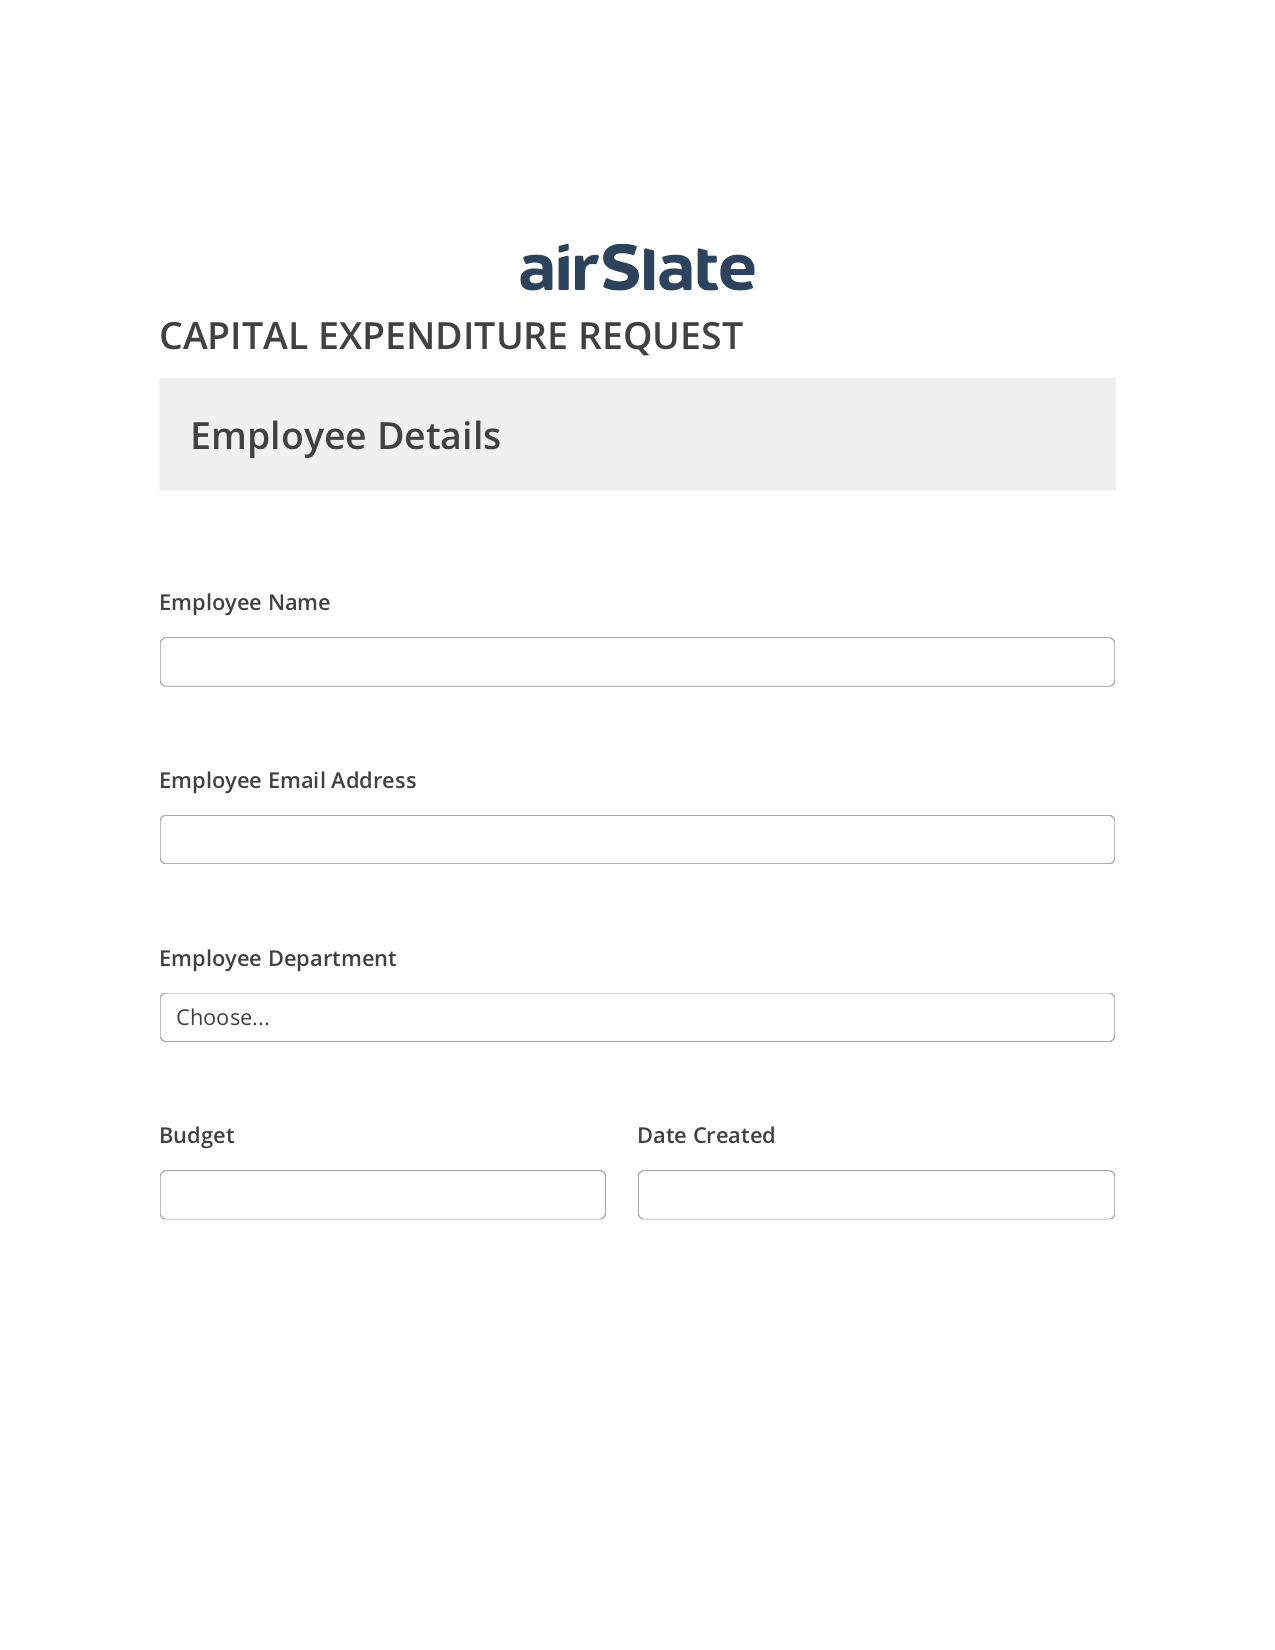 Capital Expenditure Request Approval Workflow Pre-fill from Smartsheet Bot, Update Audit Trail Bot, Archive to OneDrive Bot